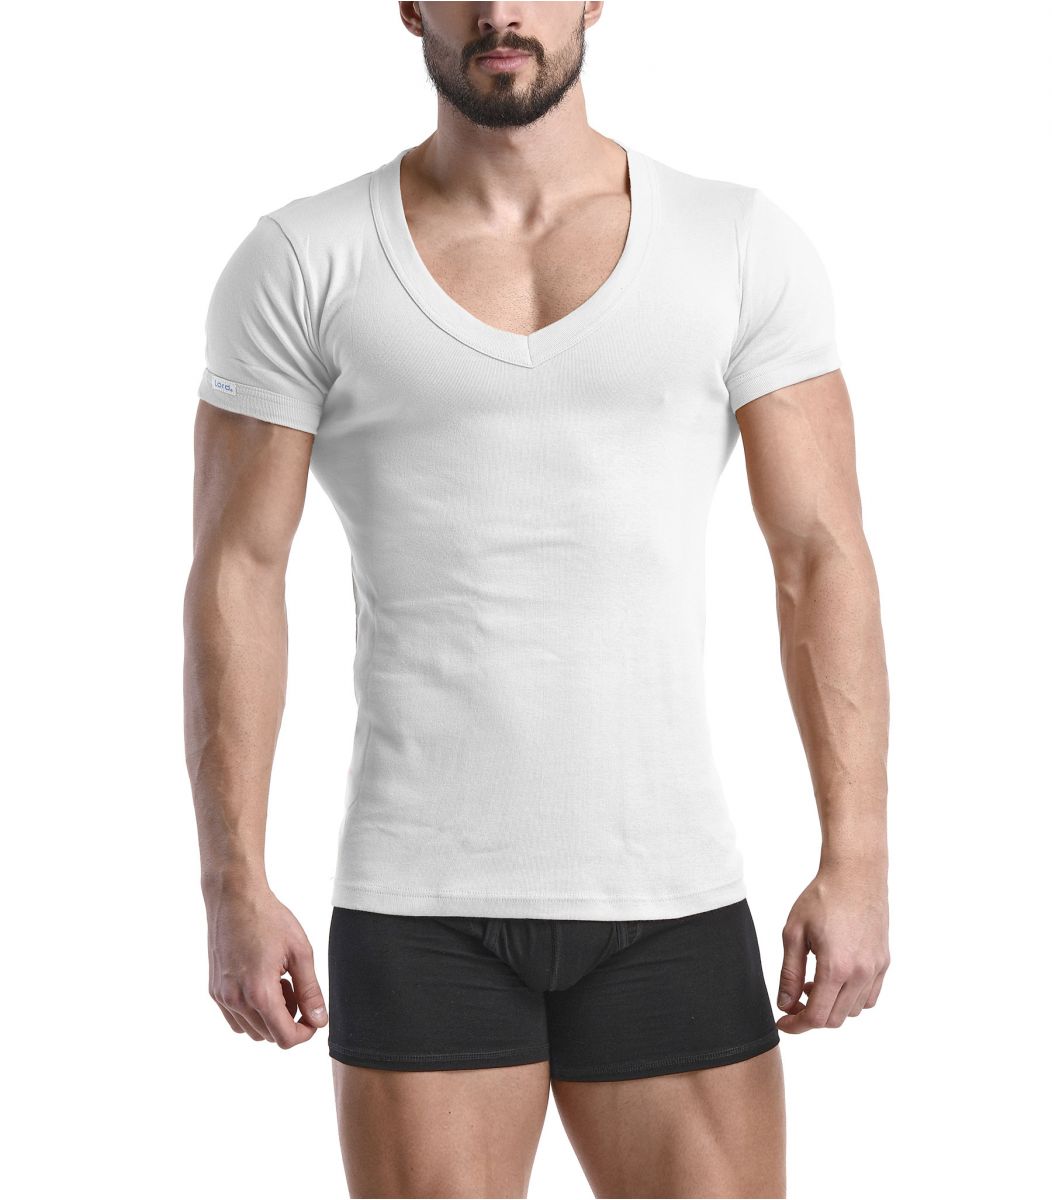  Open neck T-Shirt Lord Lord Men big Scoop Neck T-Shirt, cotton {PRODUCT_REFERENCE}-20